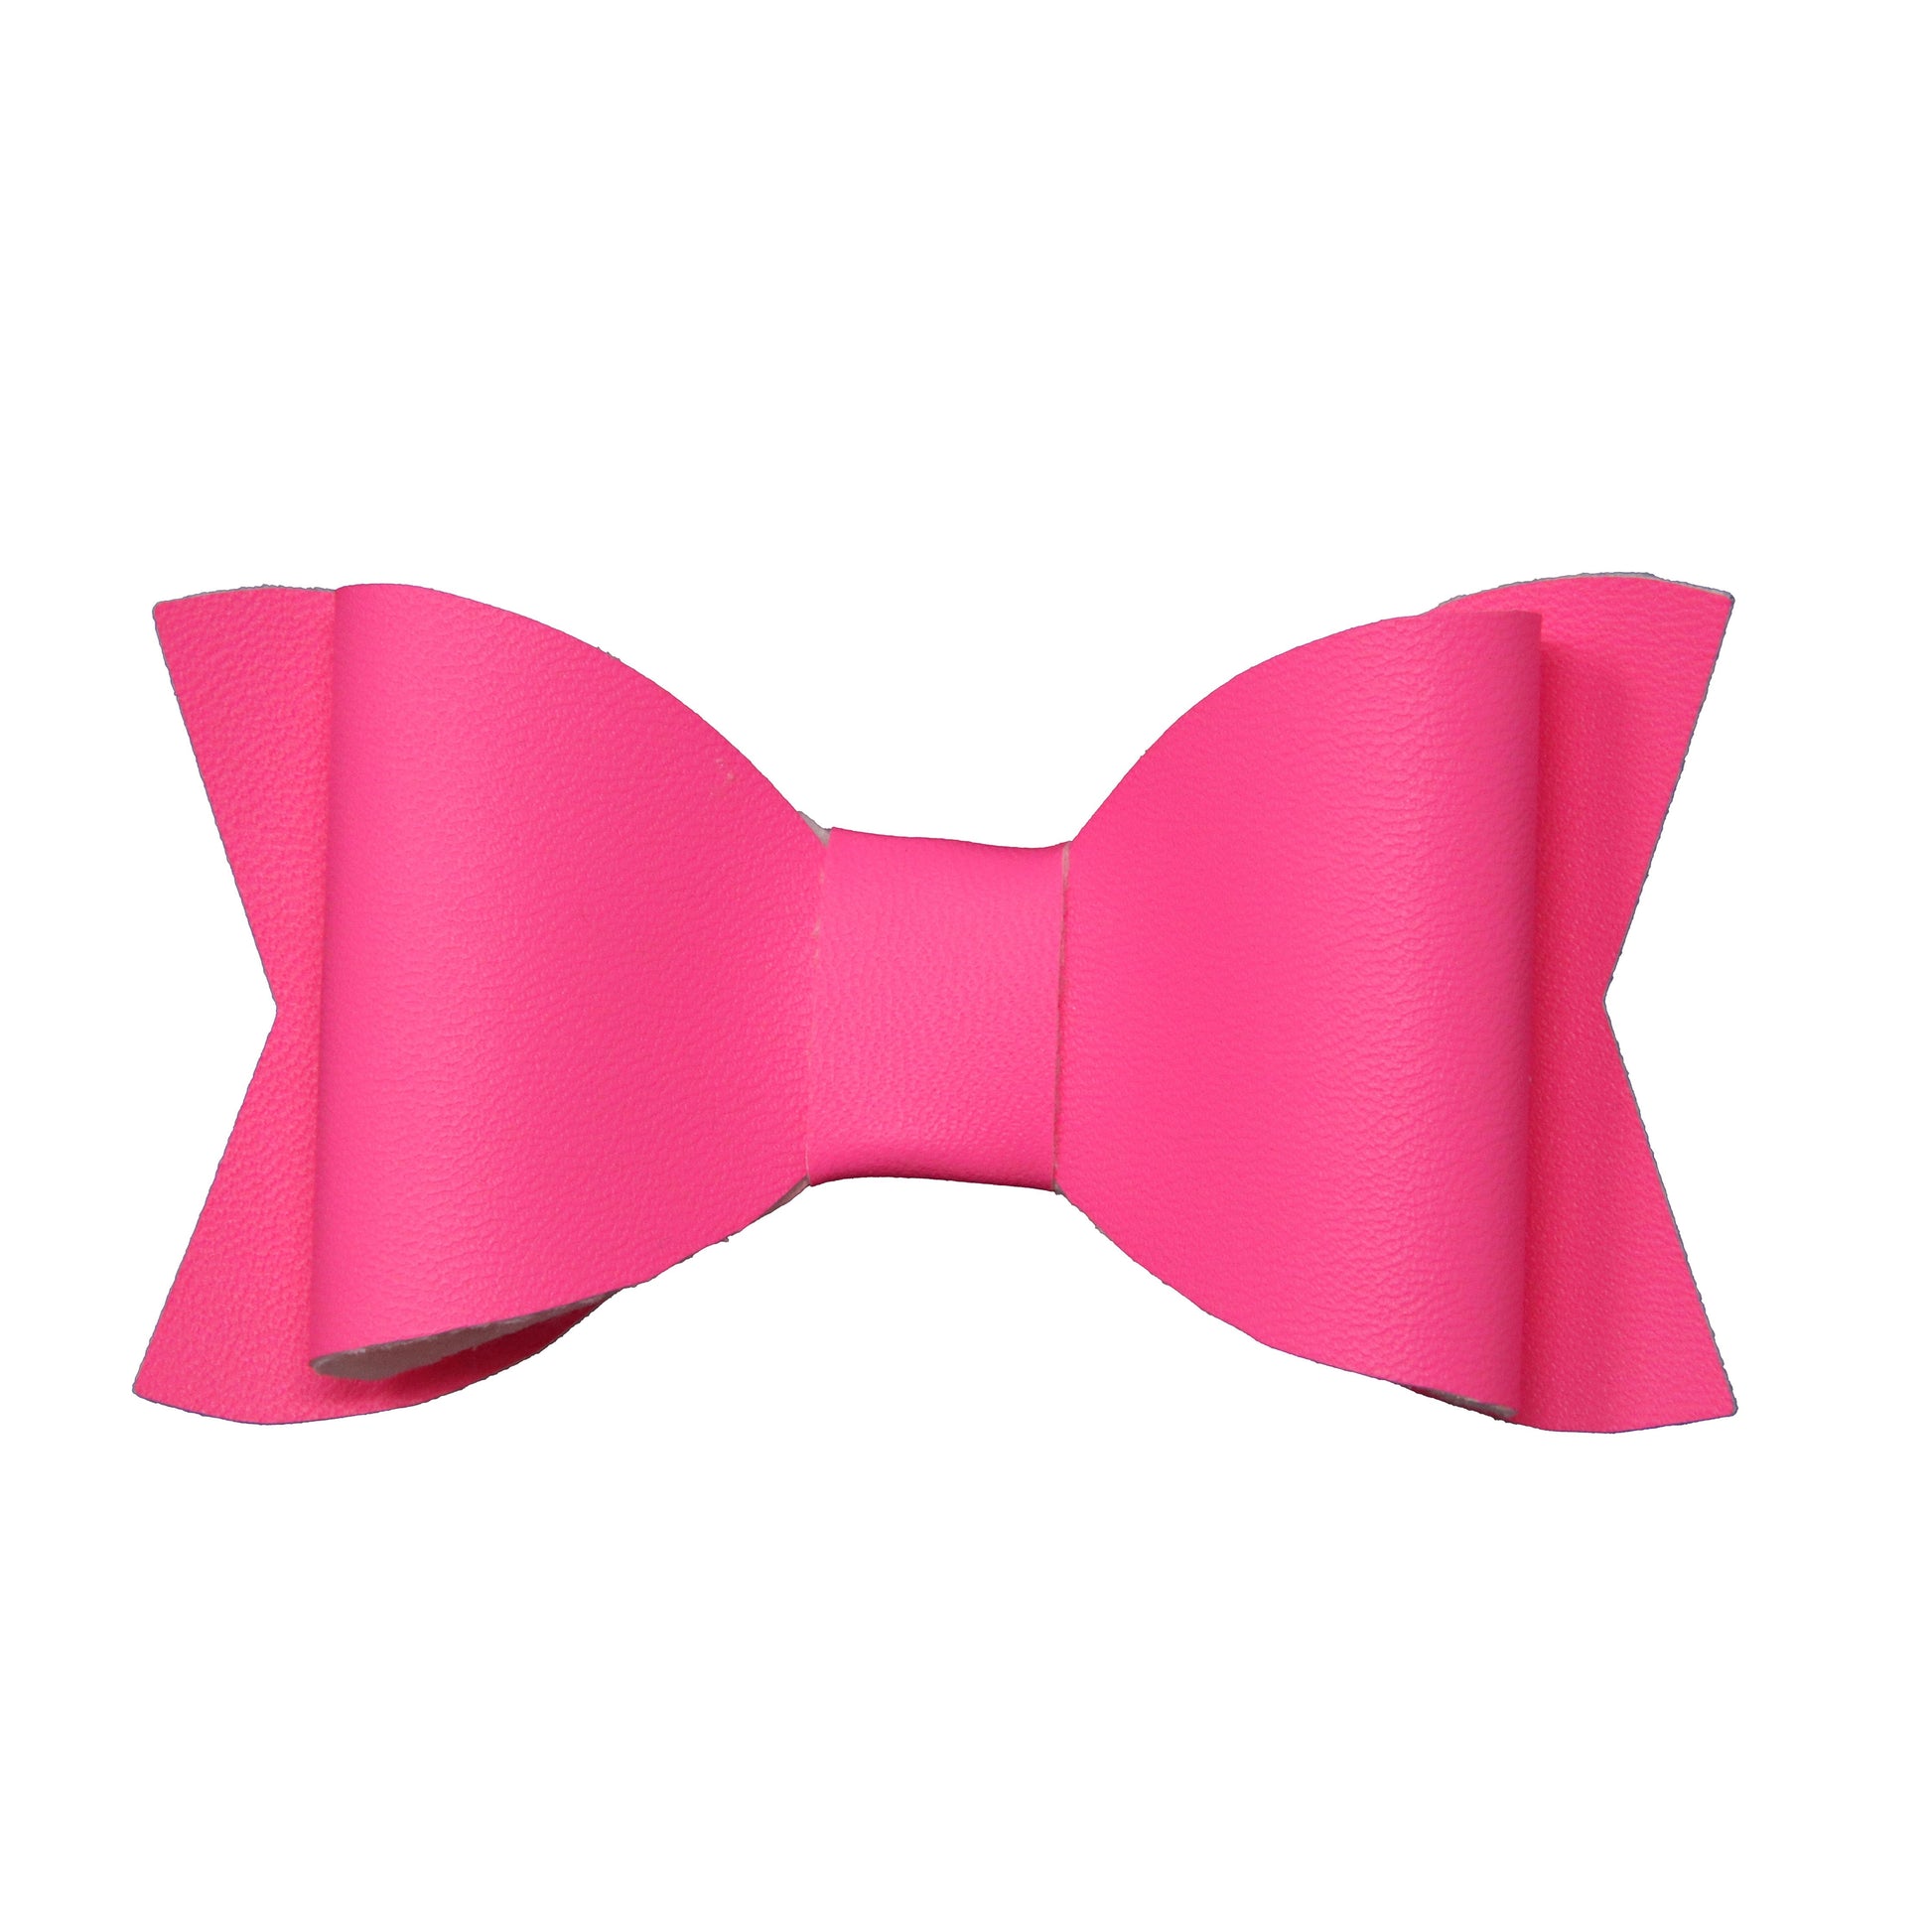 Neon Pink Claire Bow 3.5"